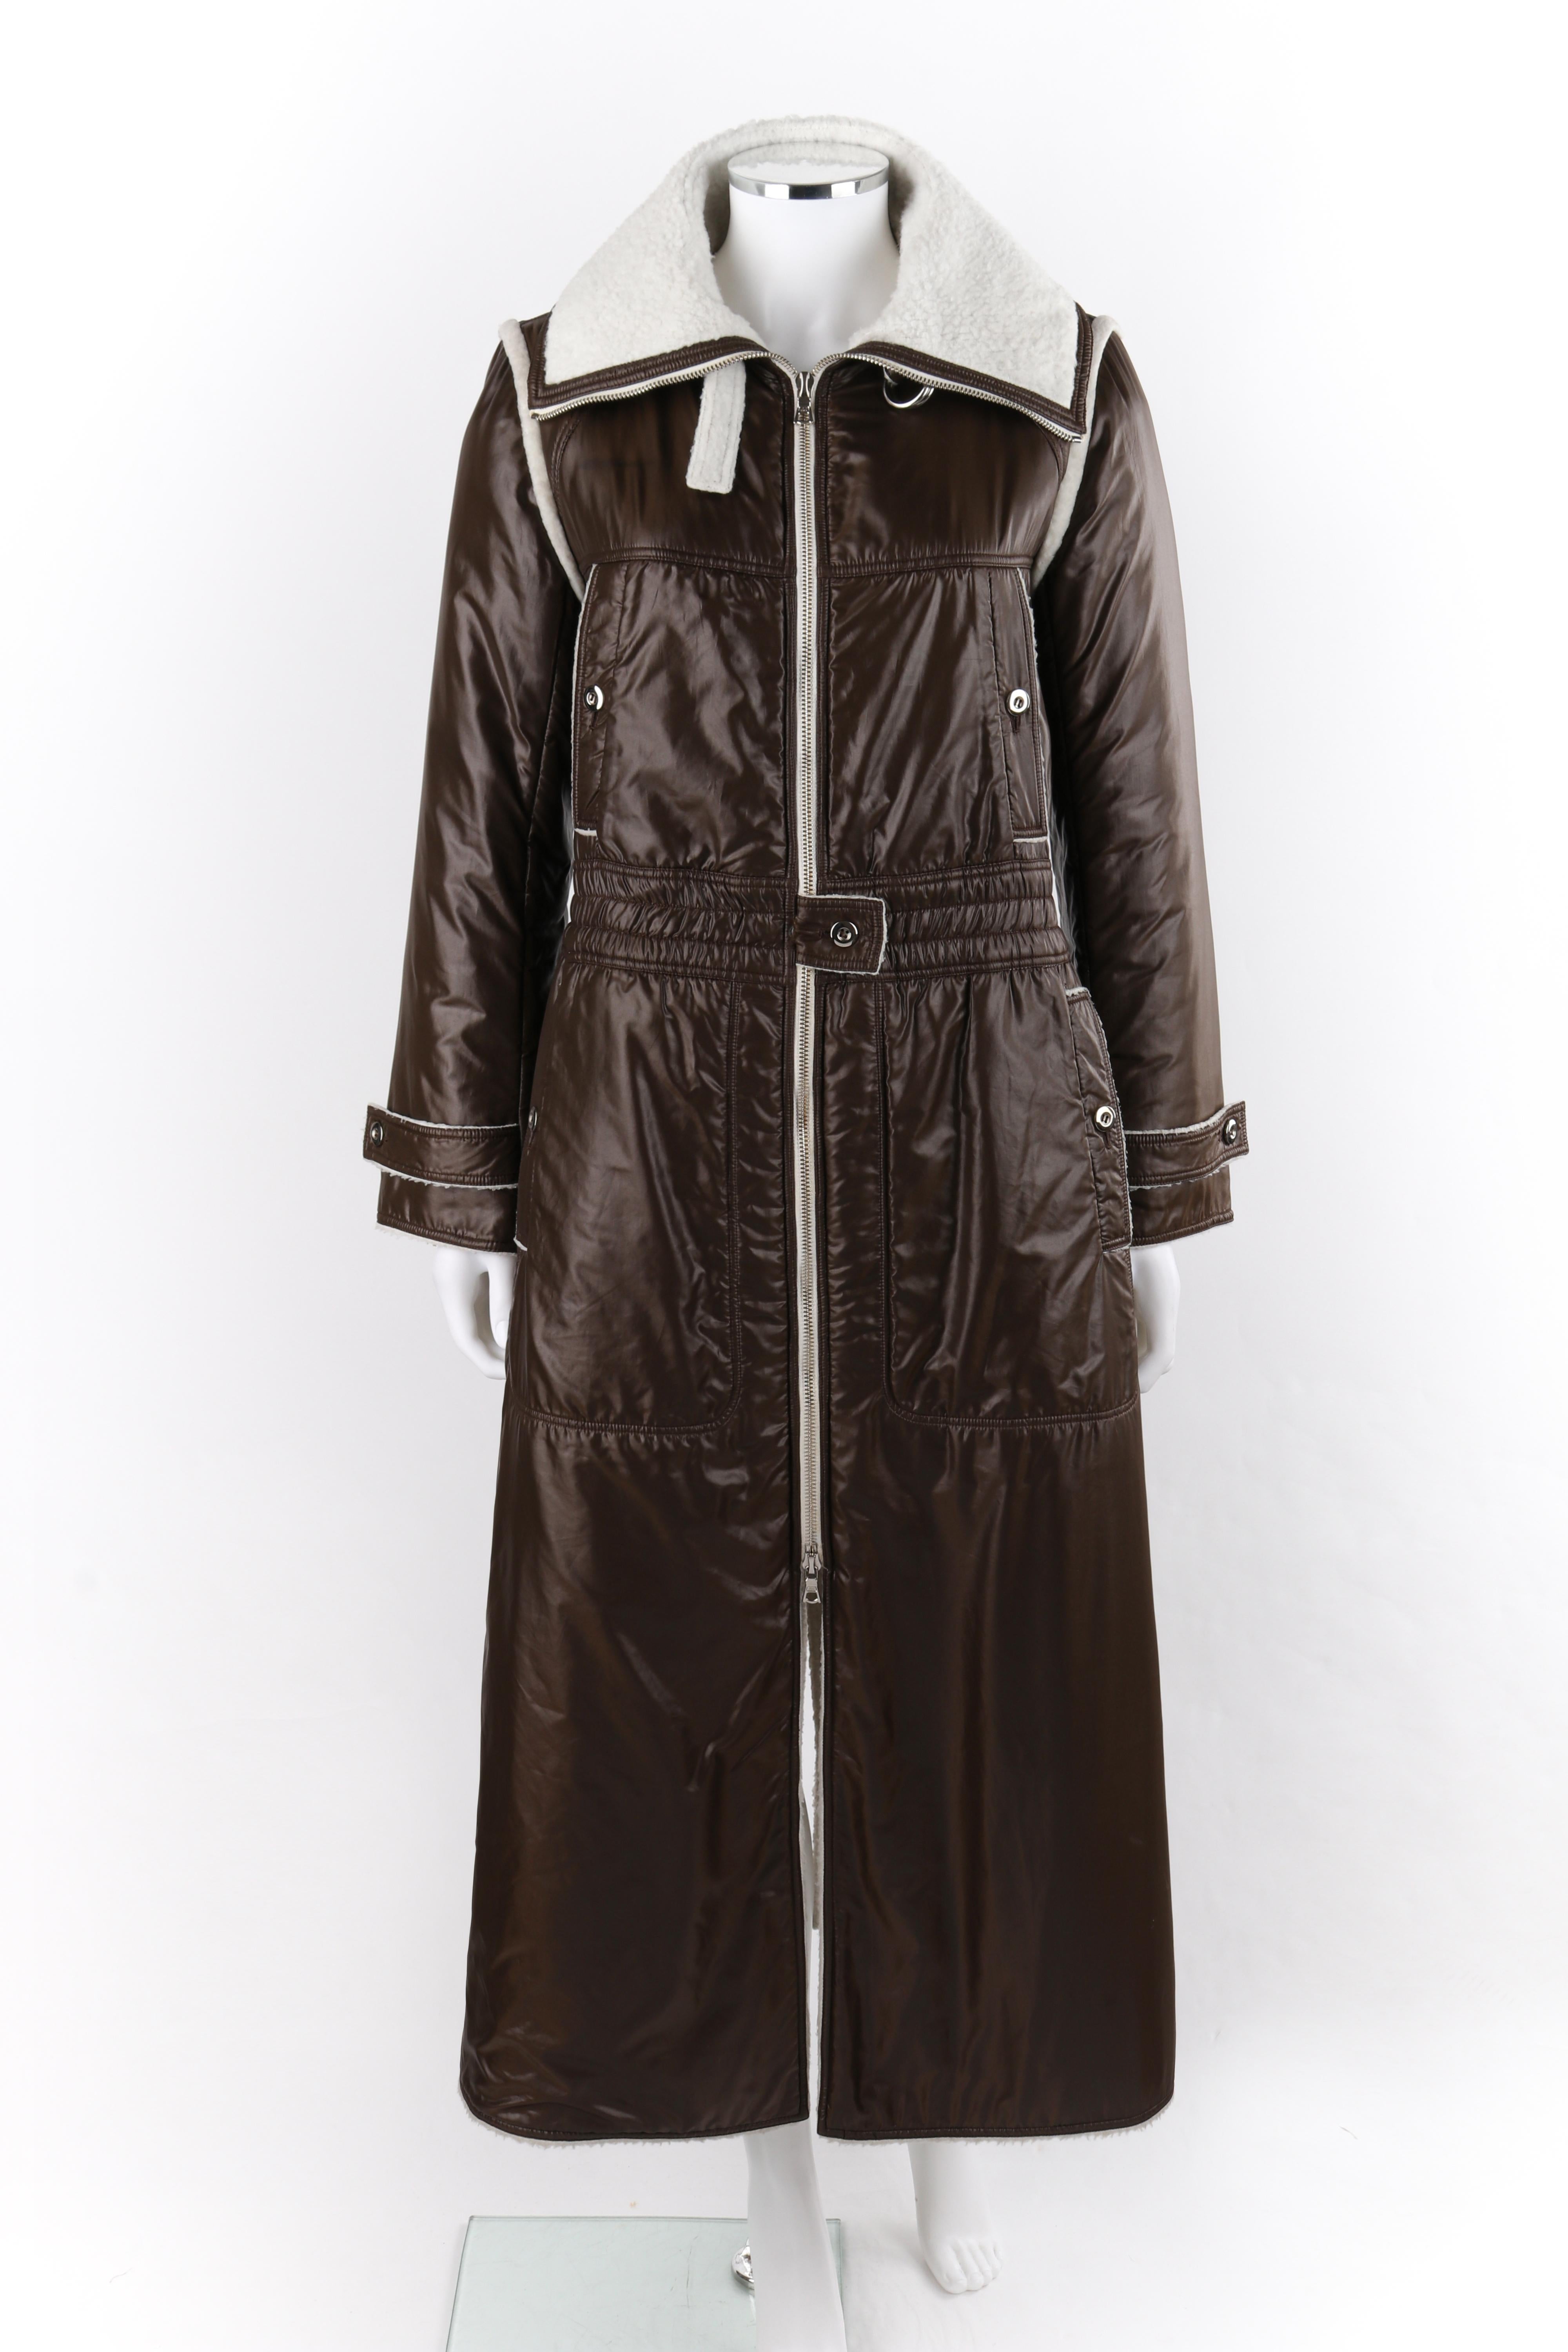 Black COURREGES c.1970’s Brown White Convertible Collar Full-Length Coat Jacket For Sale